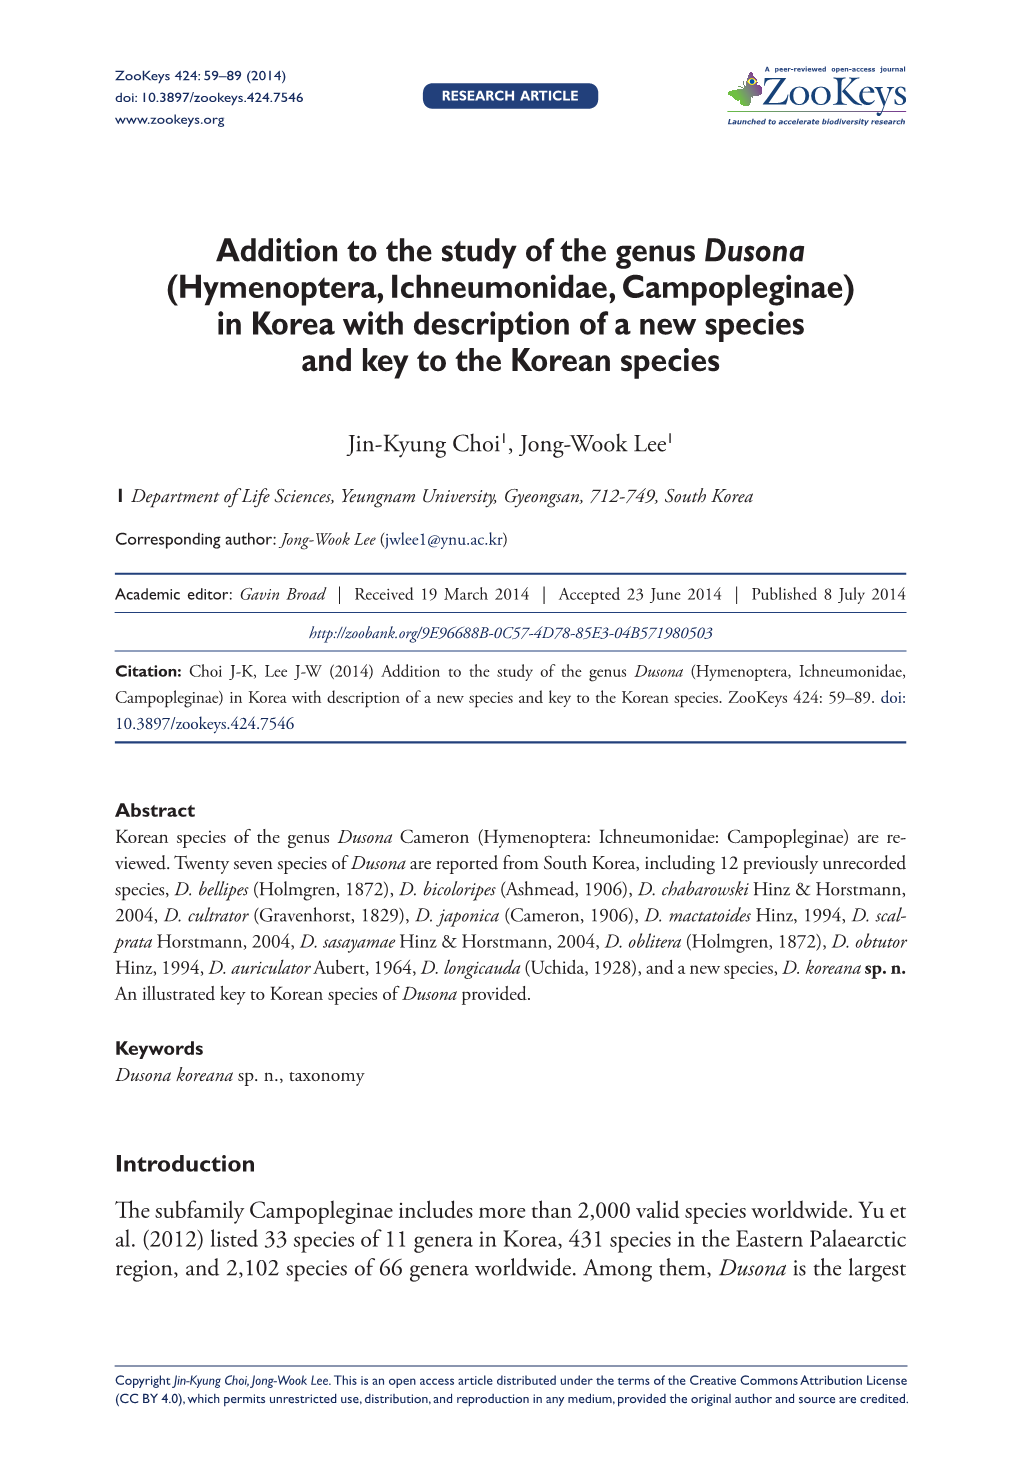 Hymenoptera, Ichneumonidae, Campopleginae) in Korea with Description of a New Species and Key to the Korean Species